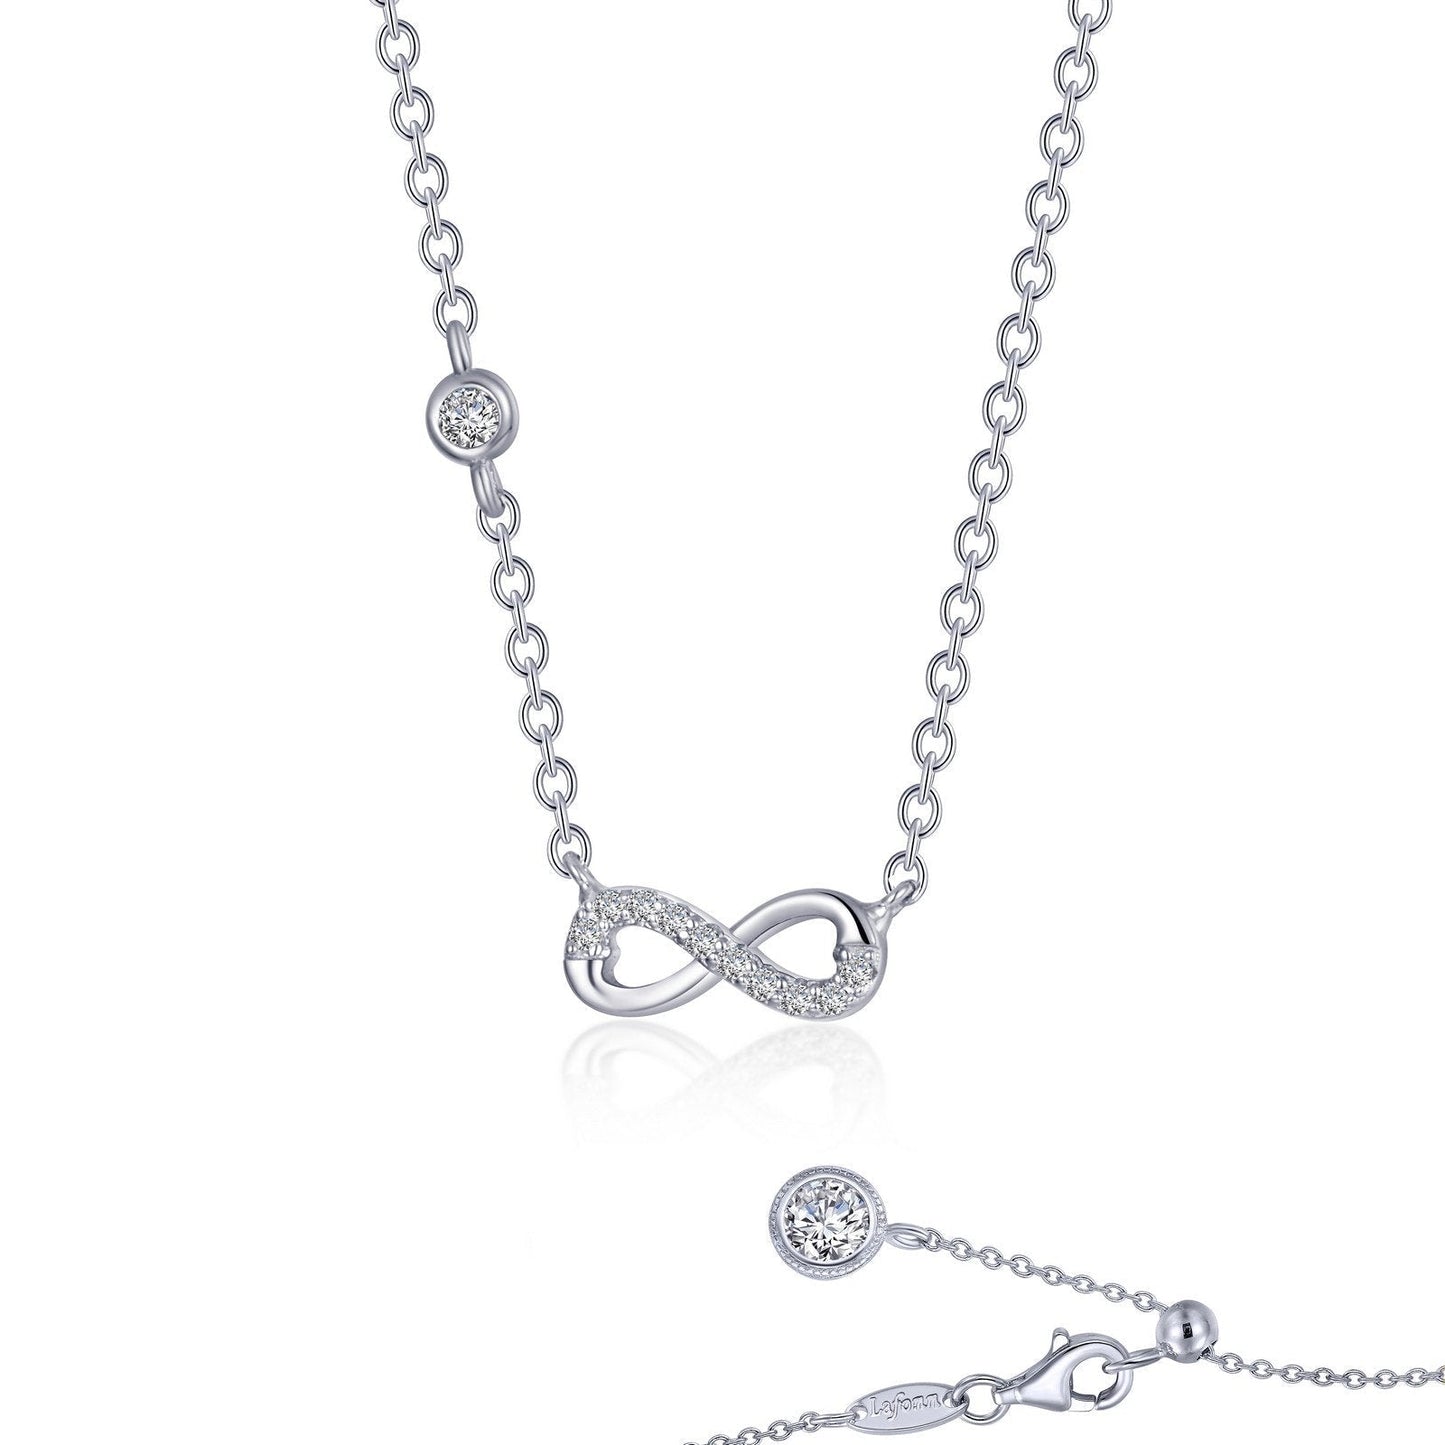 LaFonn Platinum Simulated Diamond N/A NECKLACES 0.36 CTW Infinity Necklace